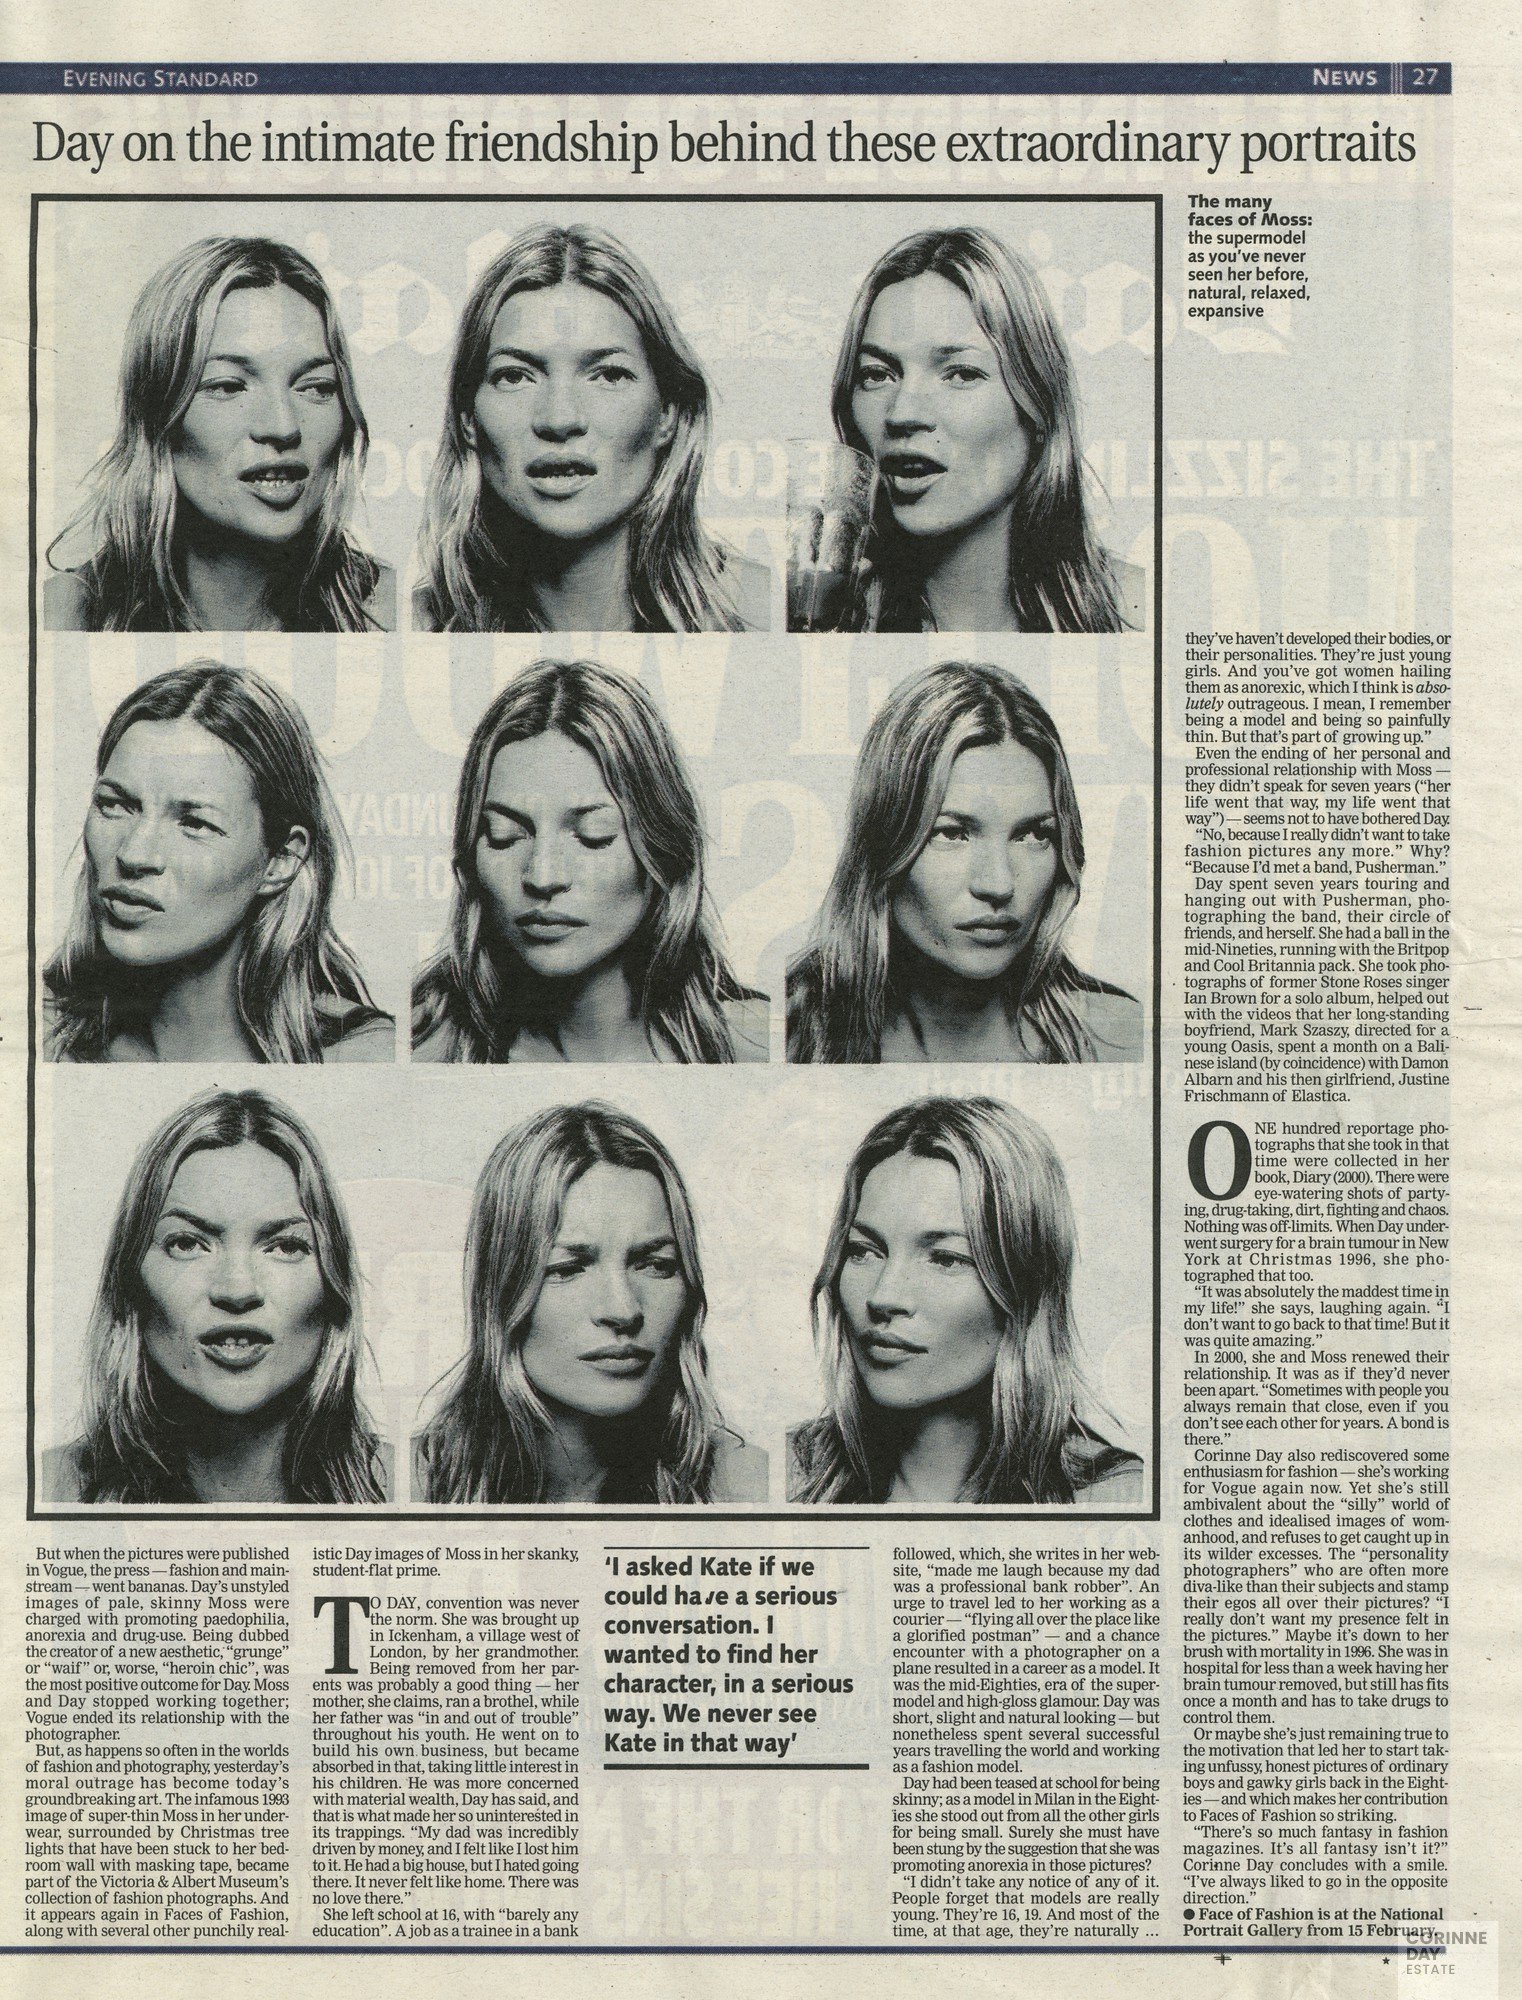 Day on the intimate friendship behind these extraordinary portraits, Evening Standard, 7 Feb 2007 — Image 1 of 1